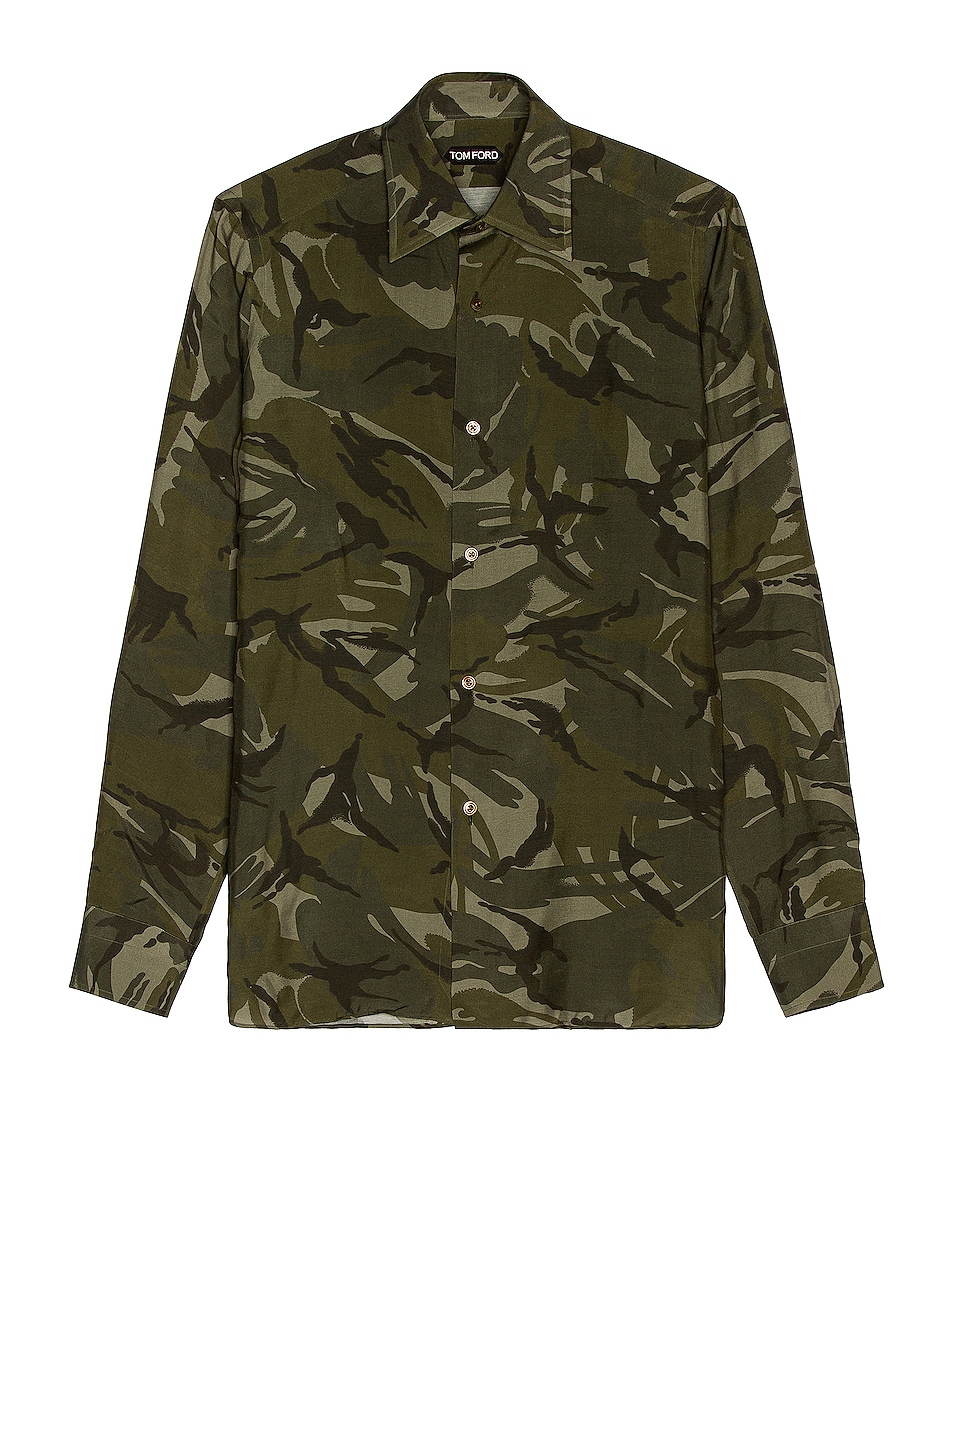 Image 1 of TOM FORD British Camo Printed Shirt in Military